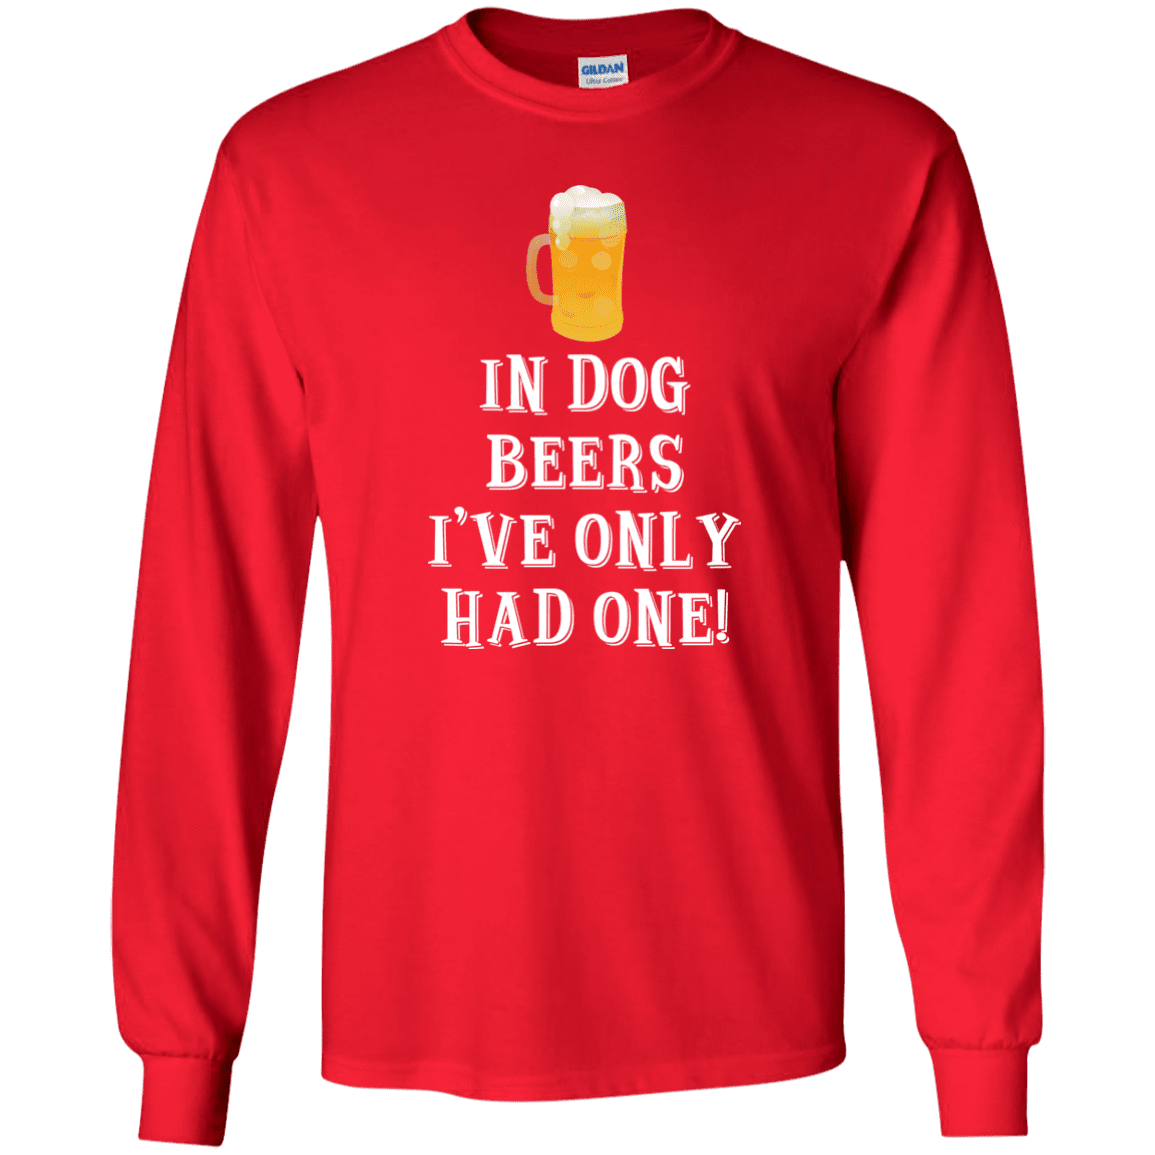 In Dog Beers I've Only Had One - Long Sleeve T Shirt.